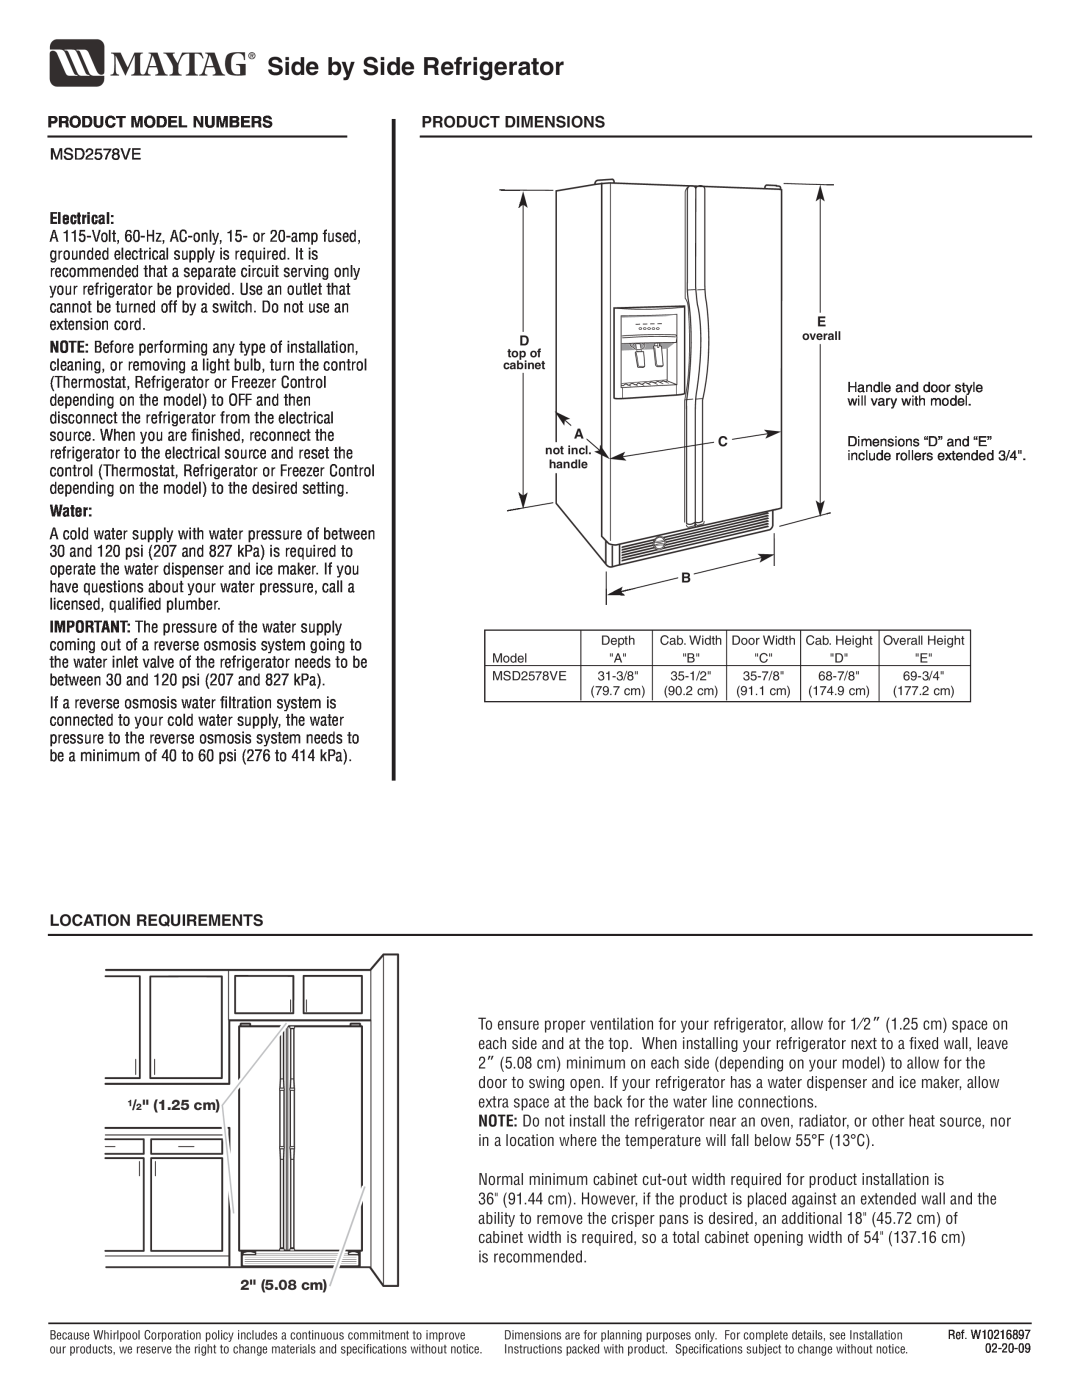 Maytag MSD2578VE dimensions Side by Side Refrigerator, Product Model Numbers, Product Dimensions, Electrical, Water 